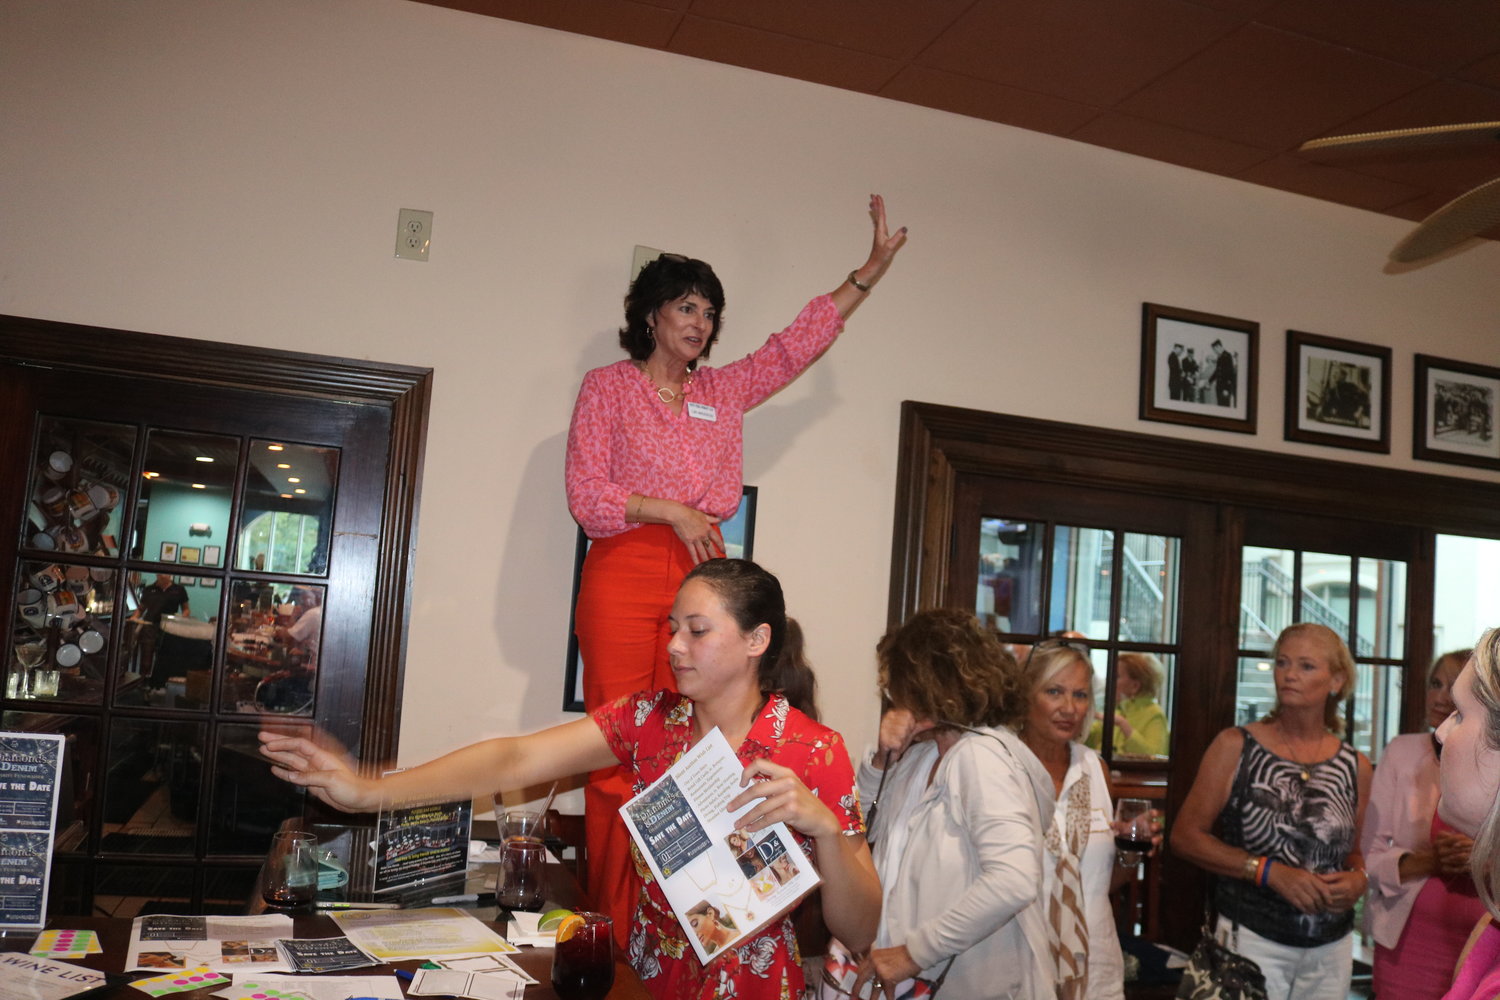 Ponte Vedra Women’s Club President Lori Marjerison (standing on a chair) speaks to the crowd in attendance.